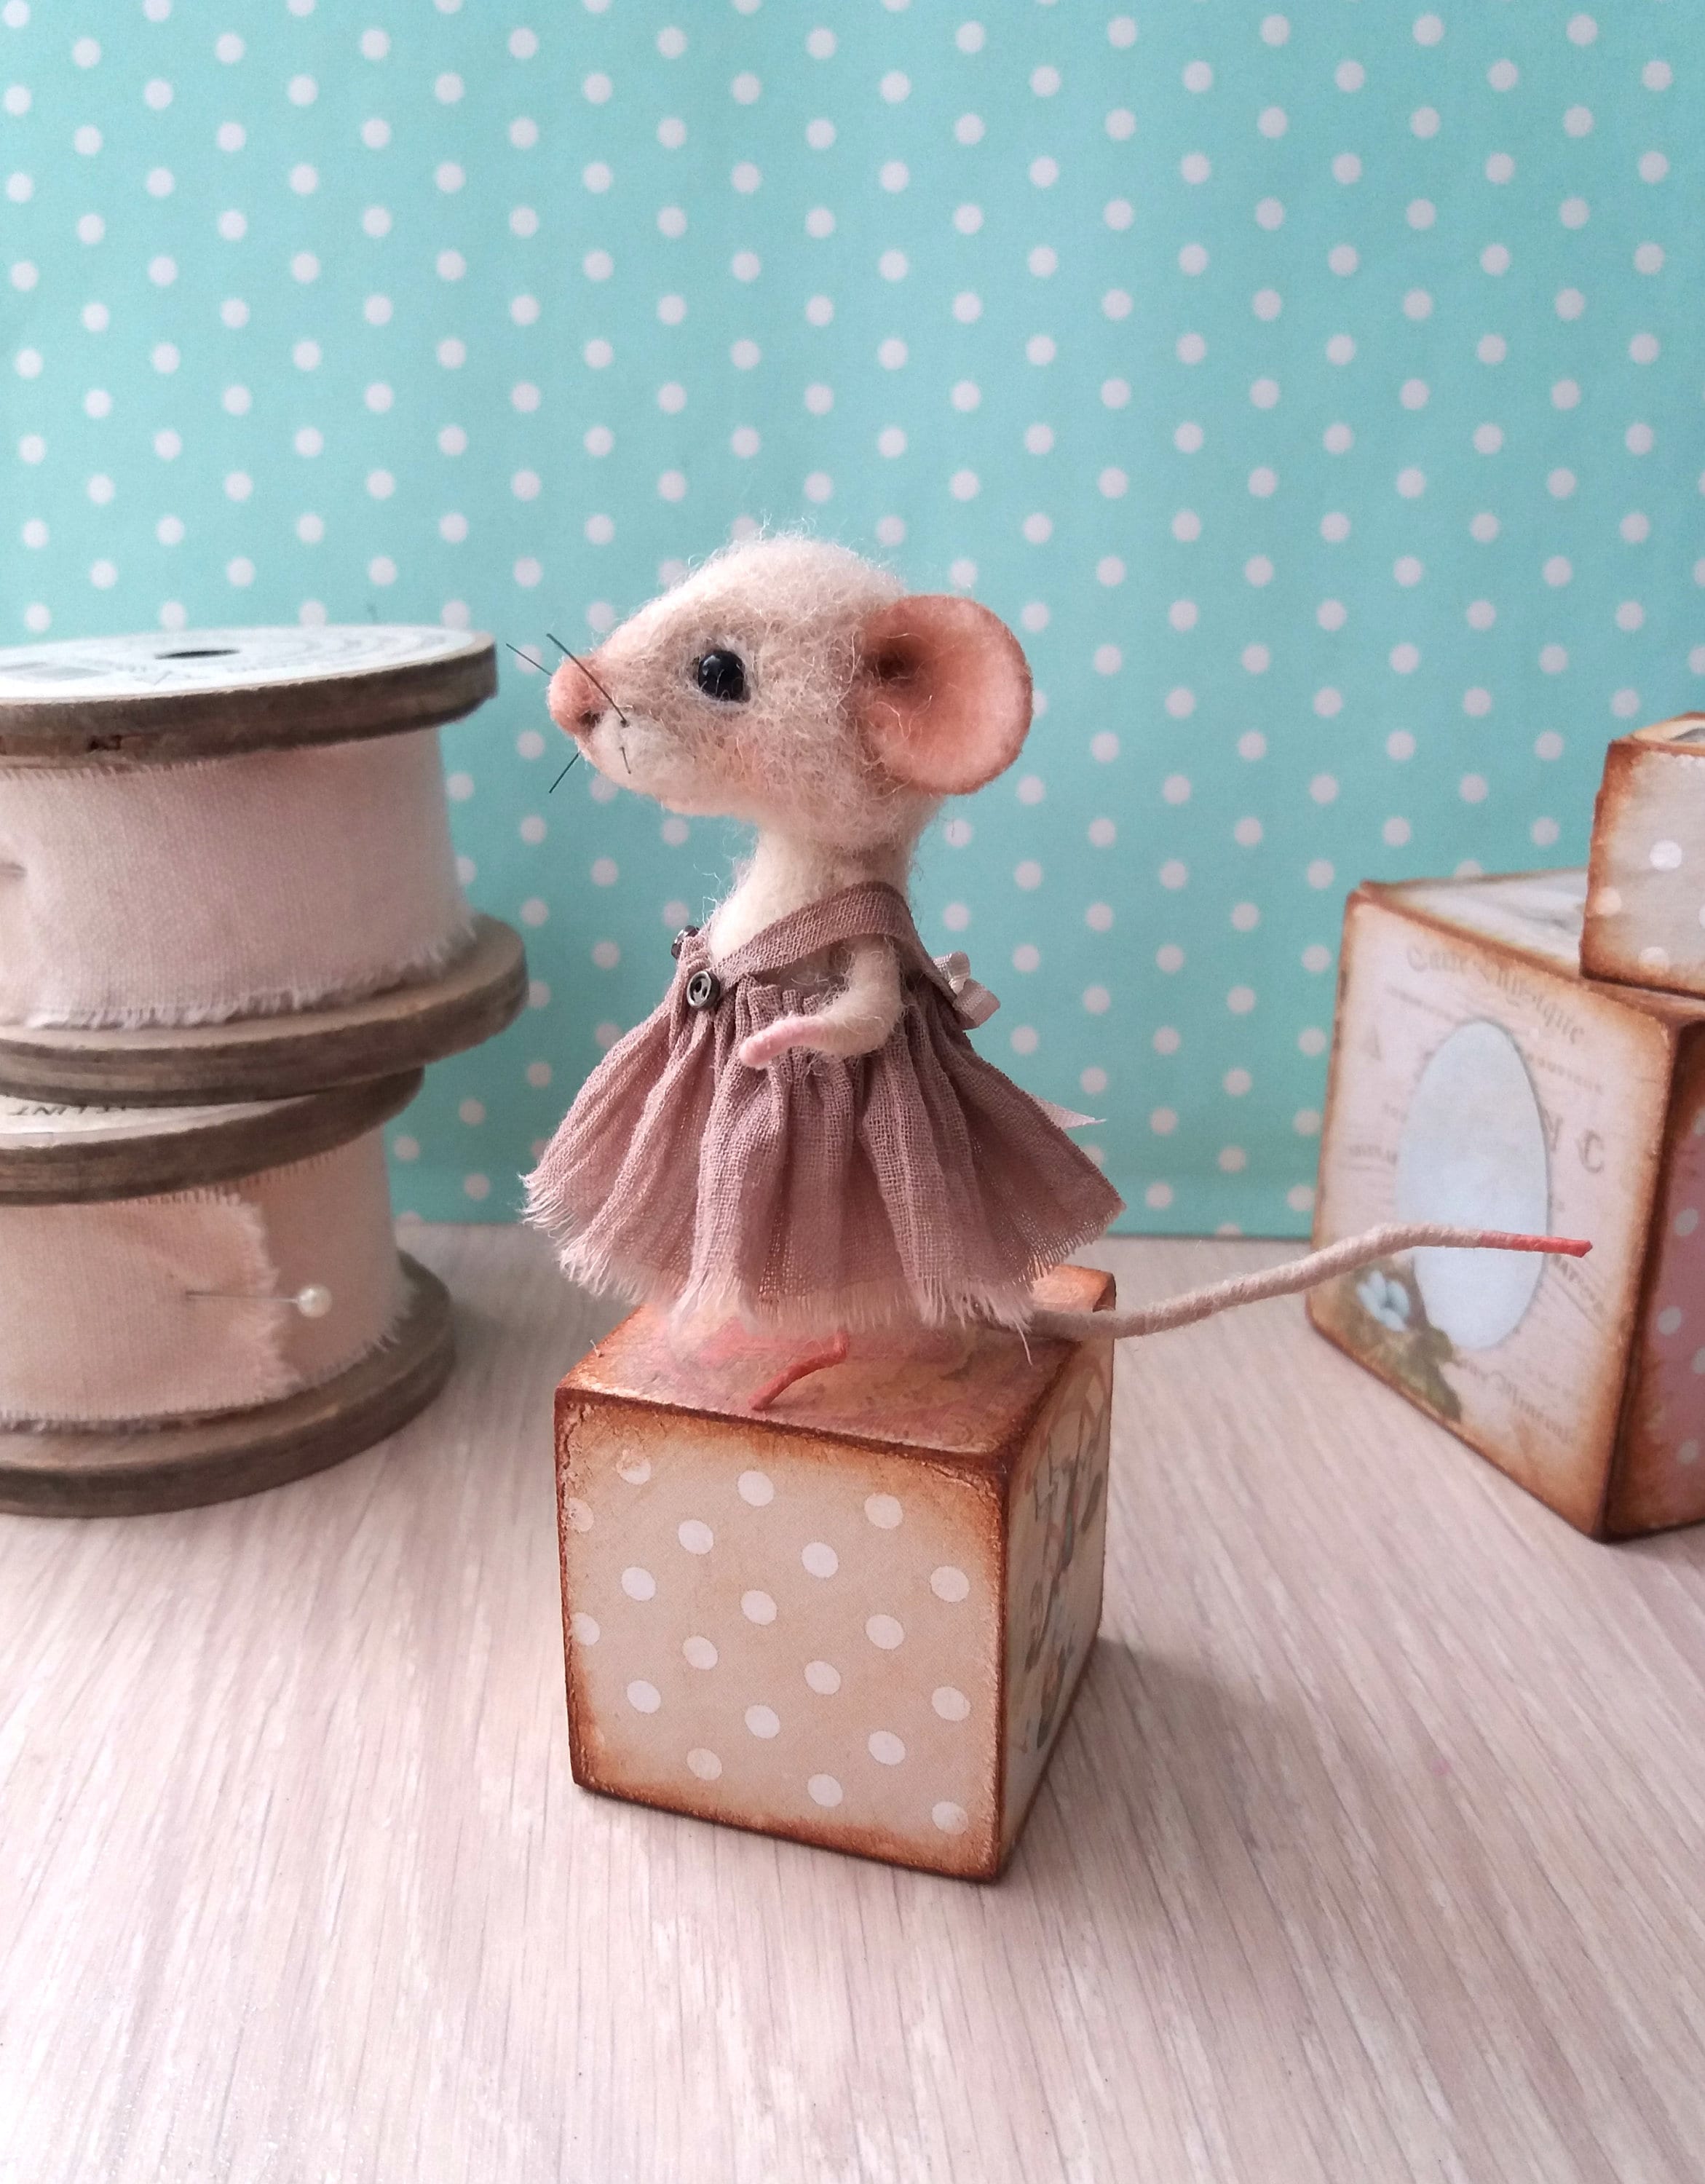 Animal Rodent Mouse With Slice Of Cake Dolls House Miniature 